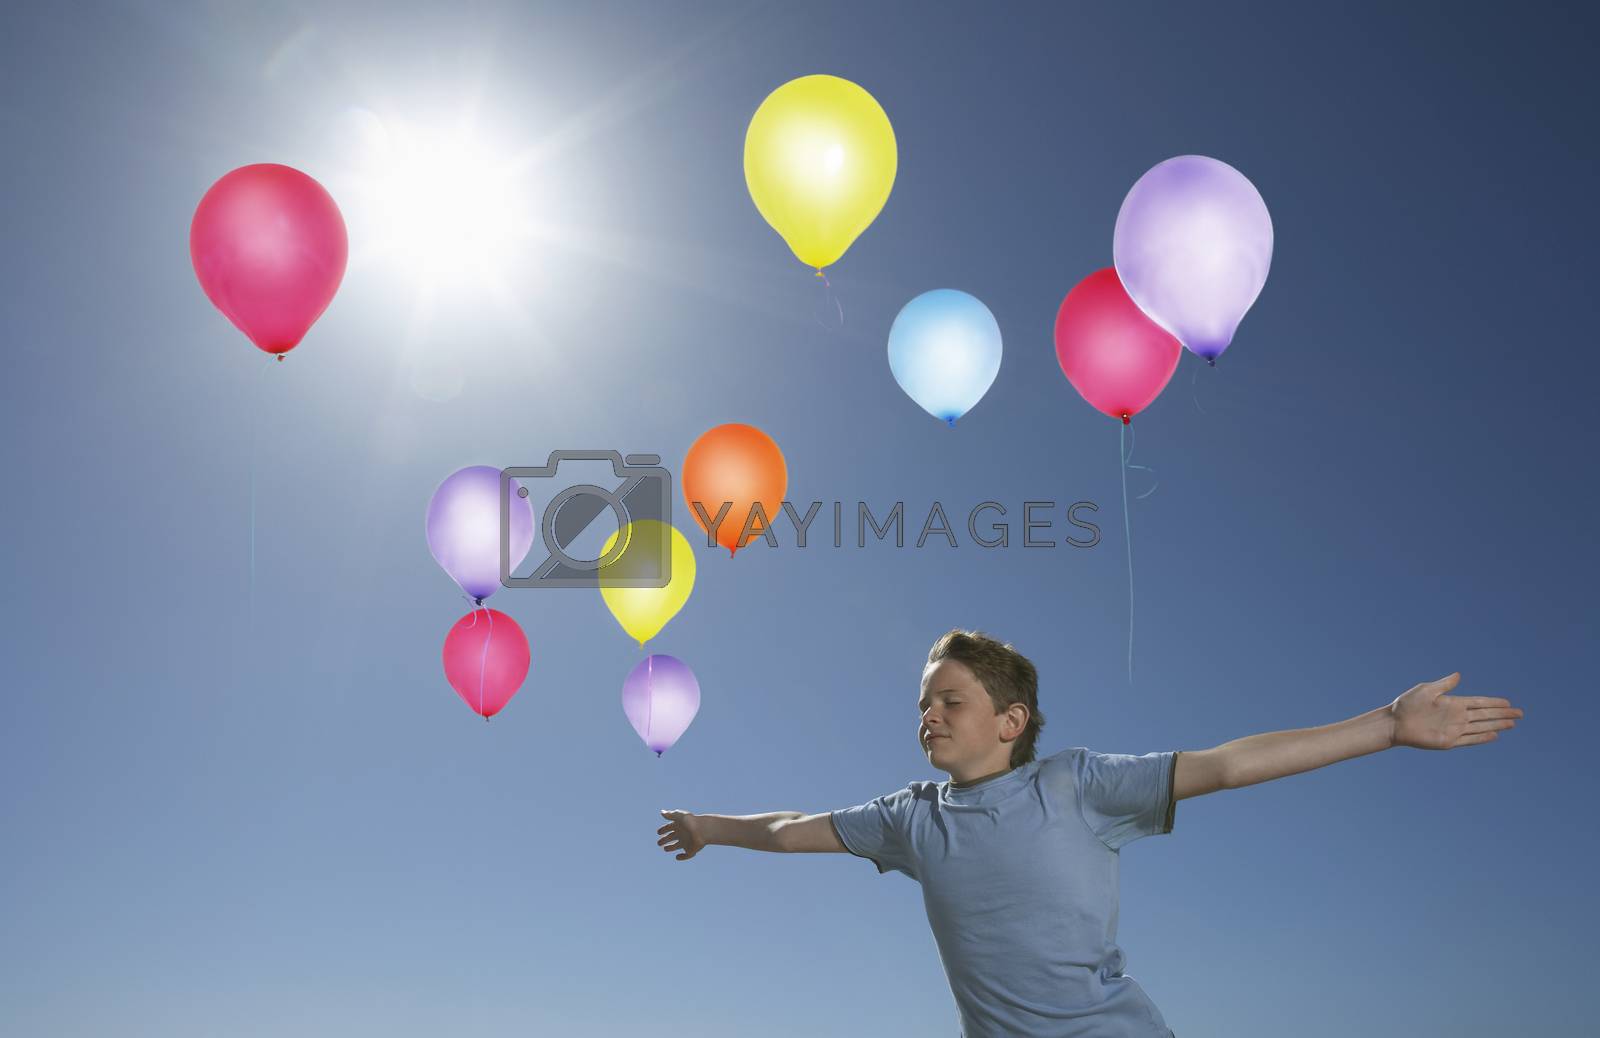 Royalty free image of Carefree elementary boy in midair with colorful balloons against blue sky by moodboard